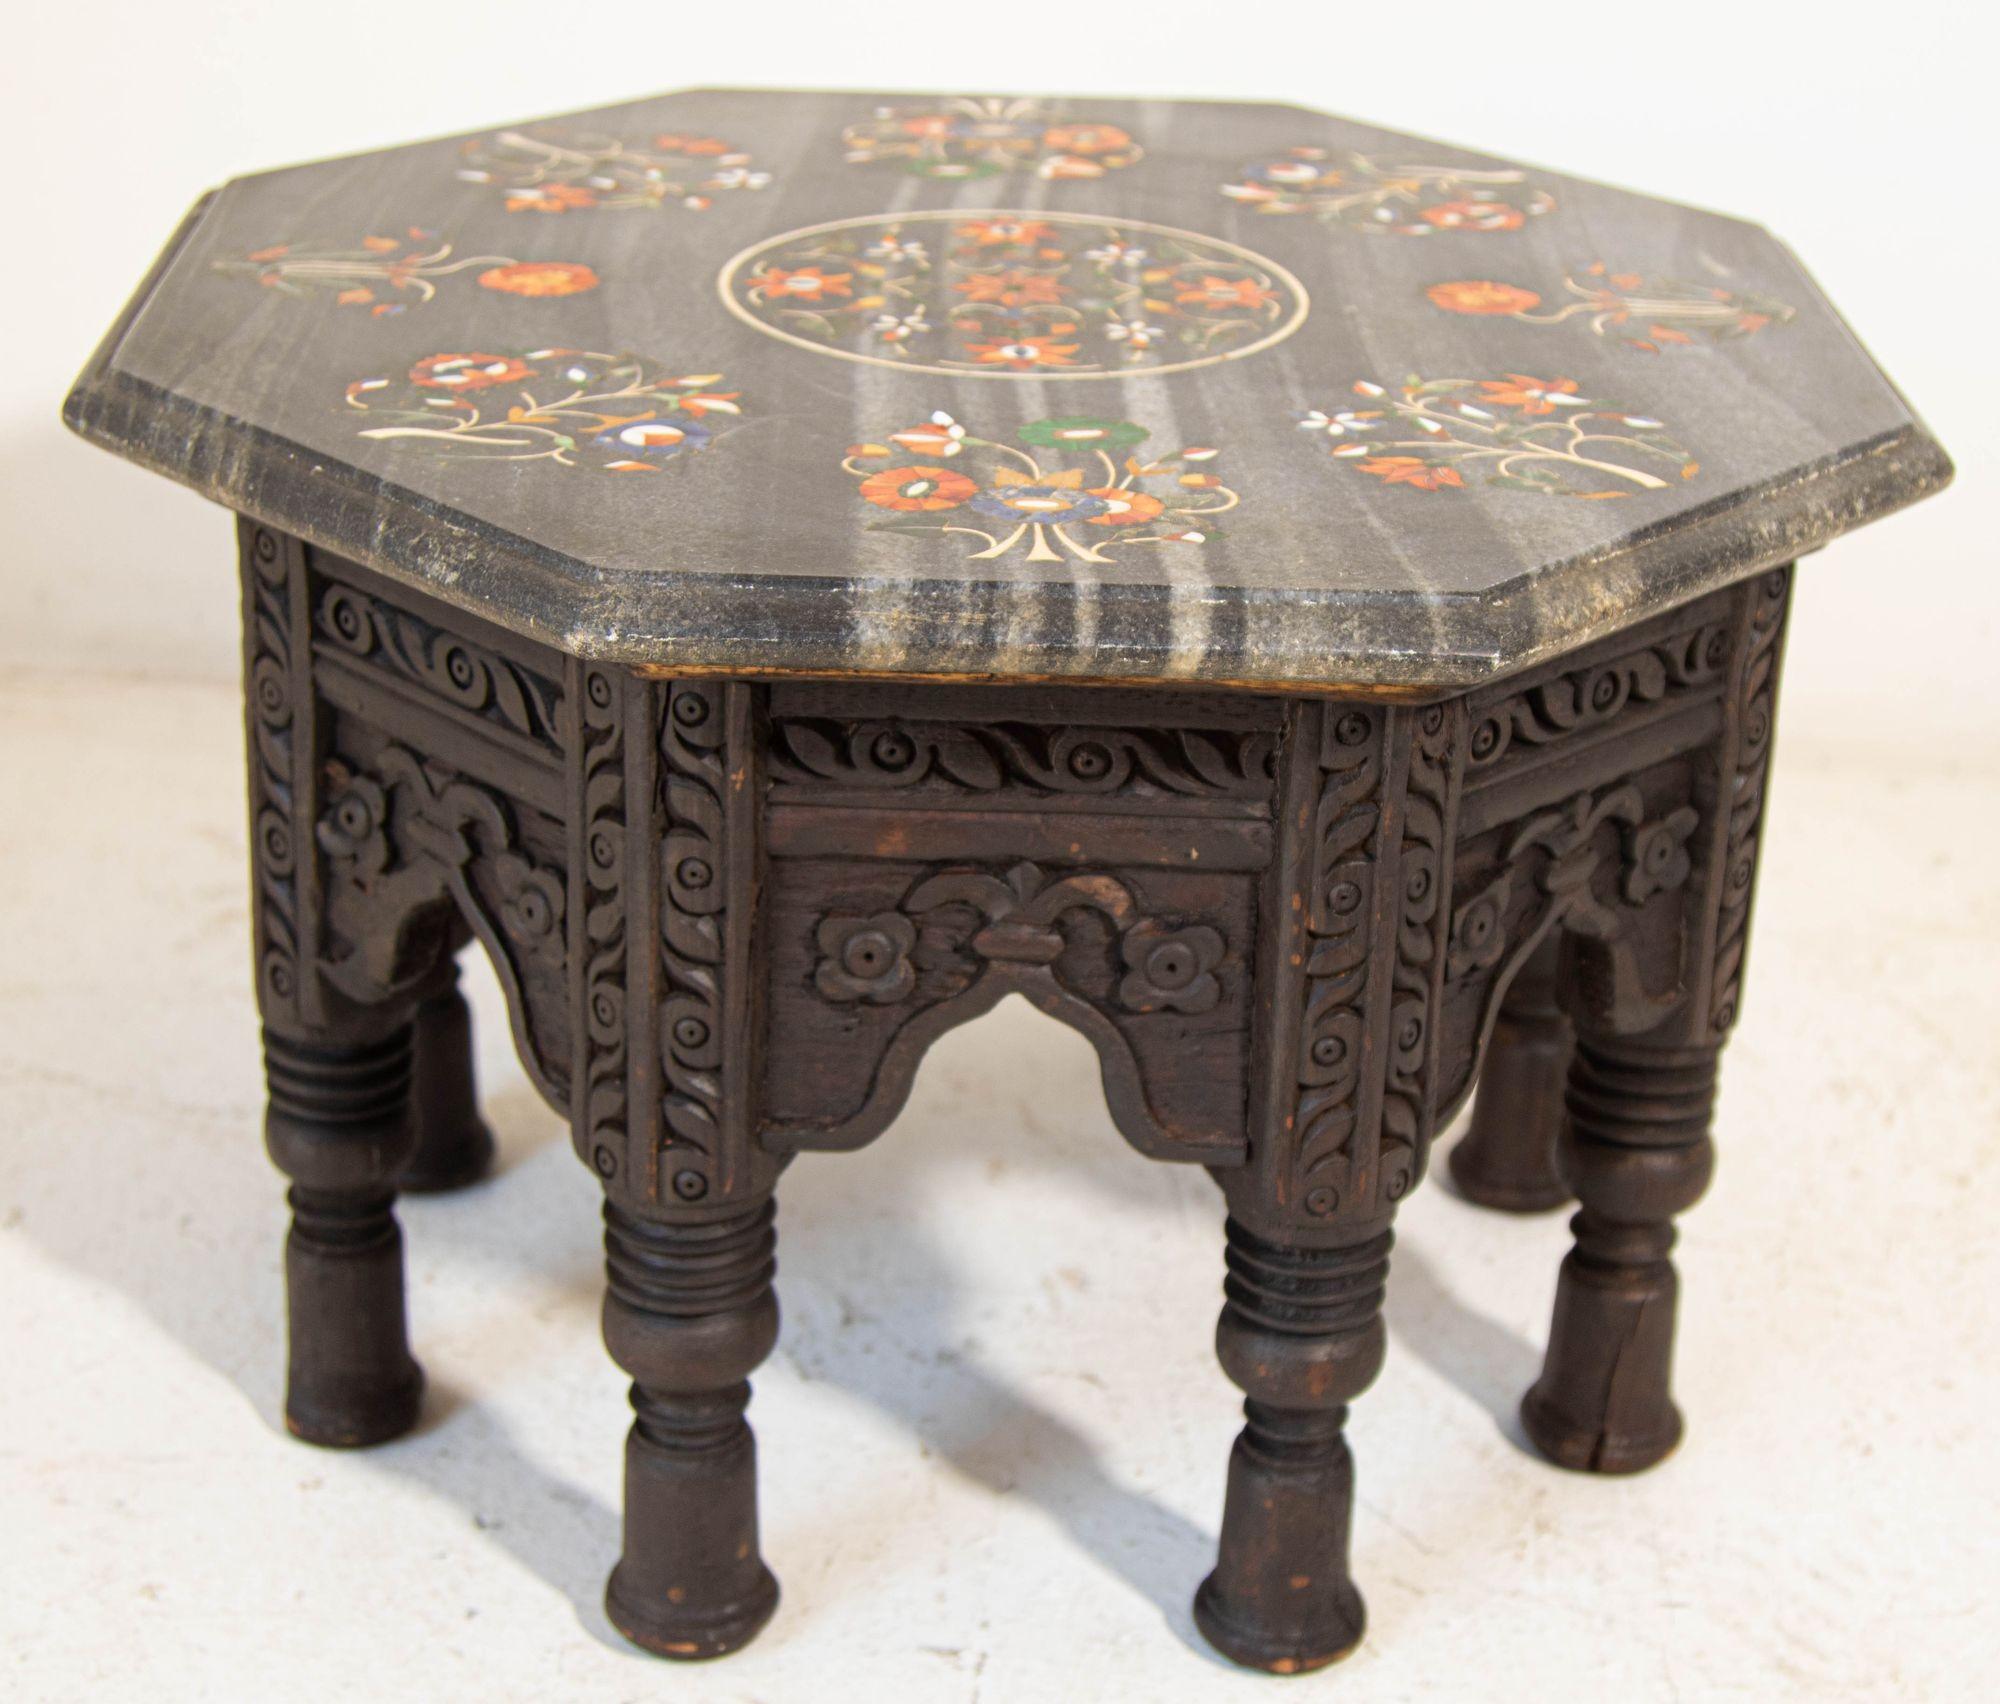 Pietra Dura Mosaic Octagonal Top Side Marble Inlaid Table Agra India For Sale 4